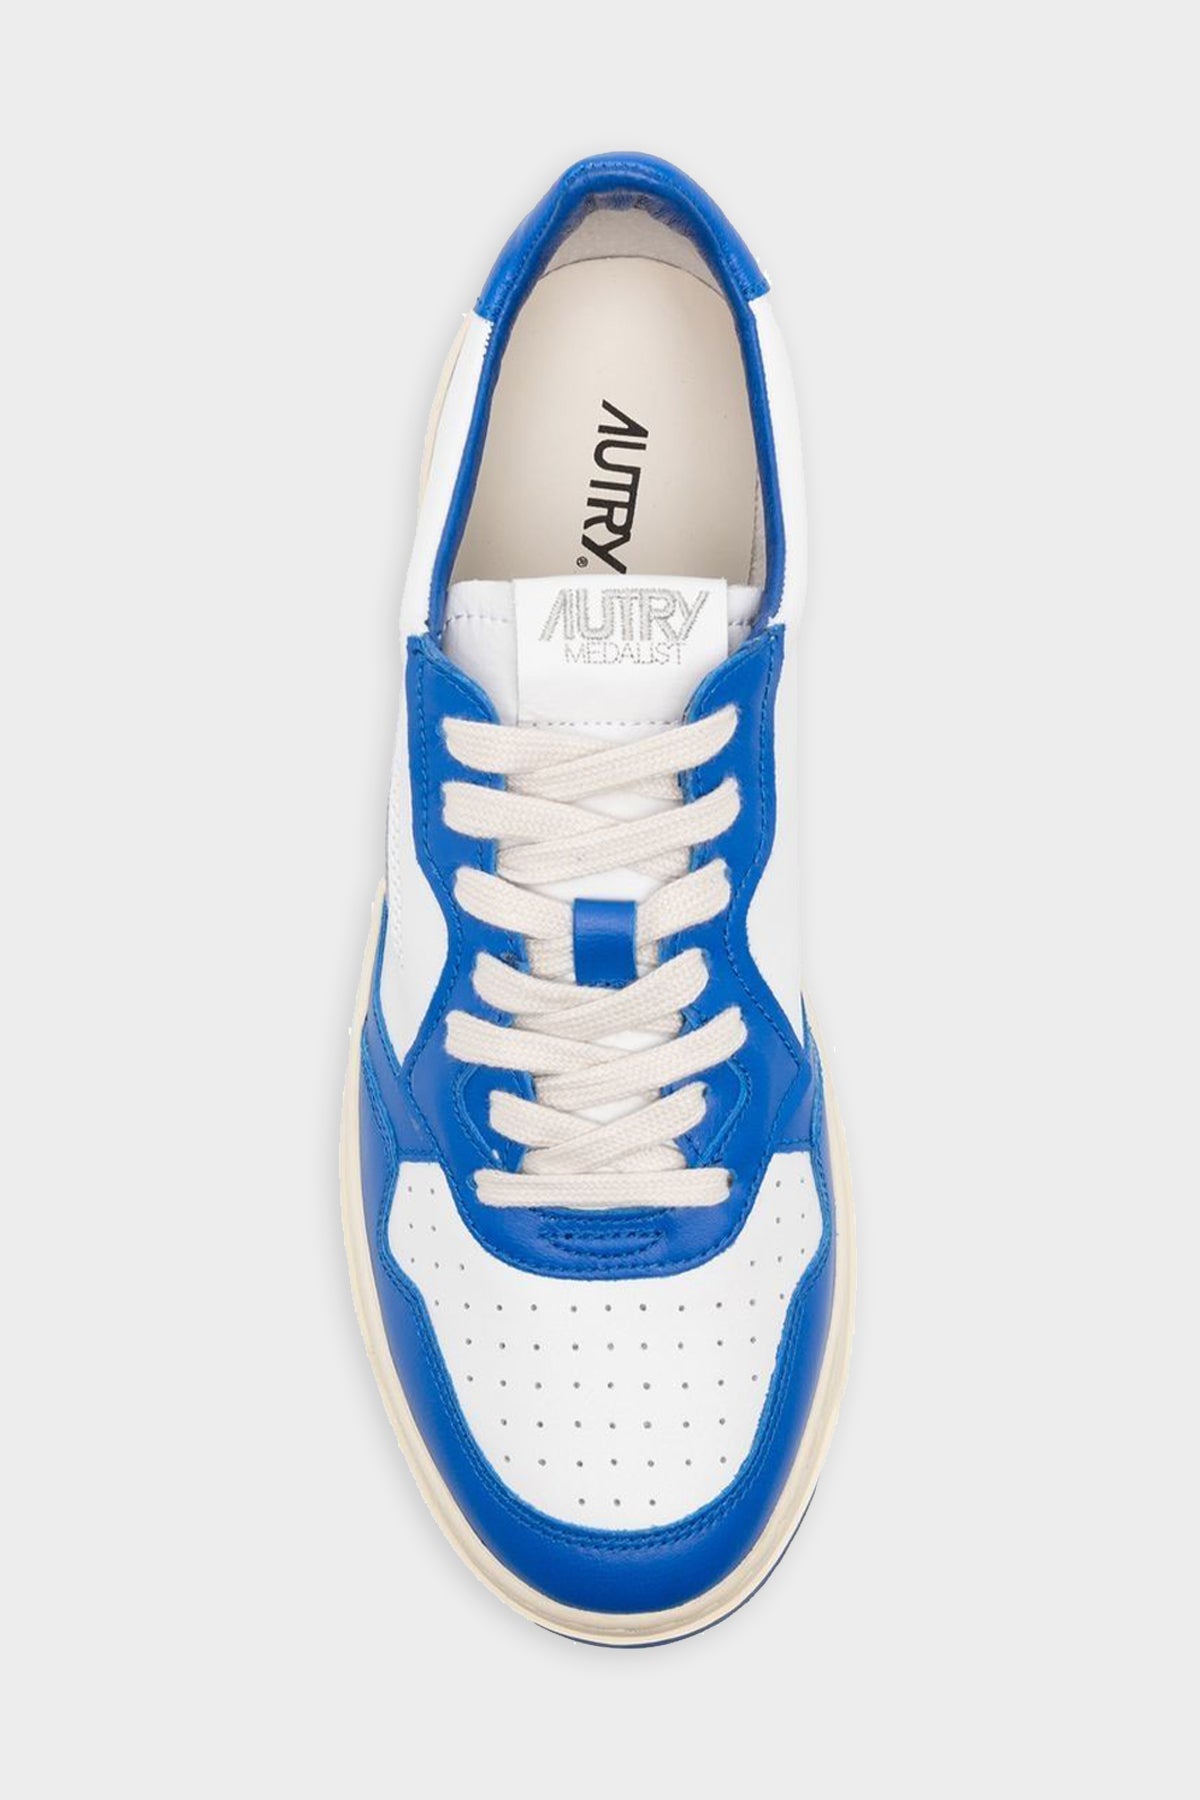 Two-Tone Medalist Low Leather Men Sneaker in White and Prince Blue - shop-olivia.com